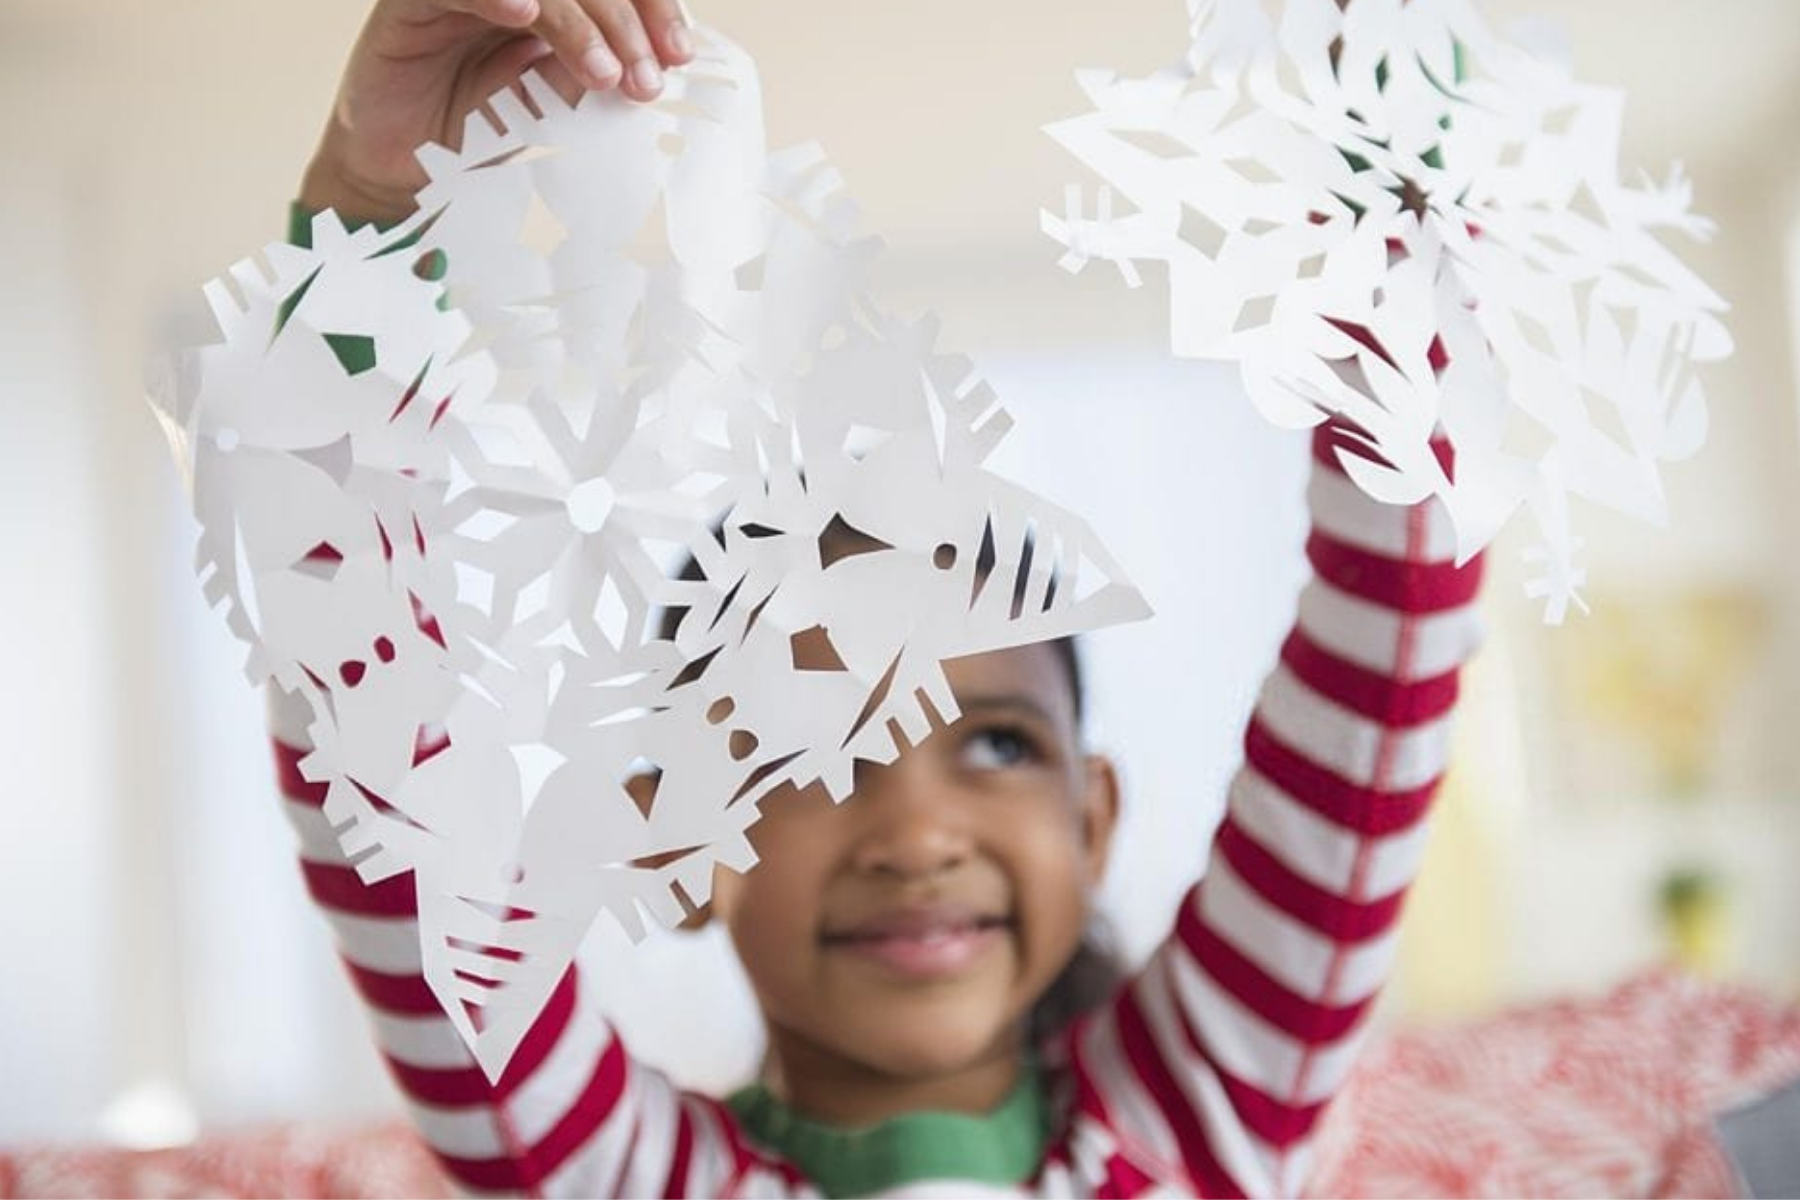 Young girl making paper snowflakes